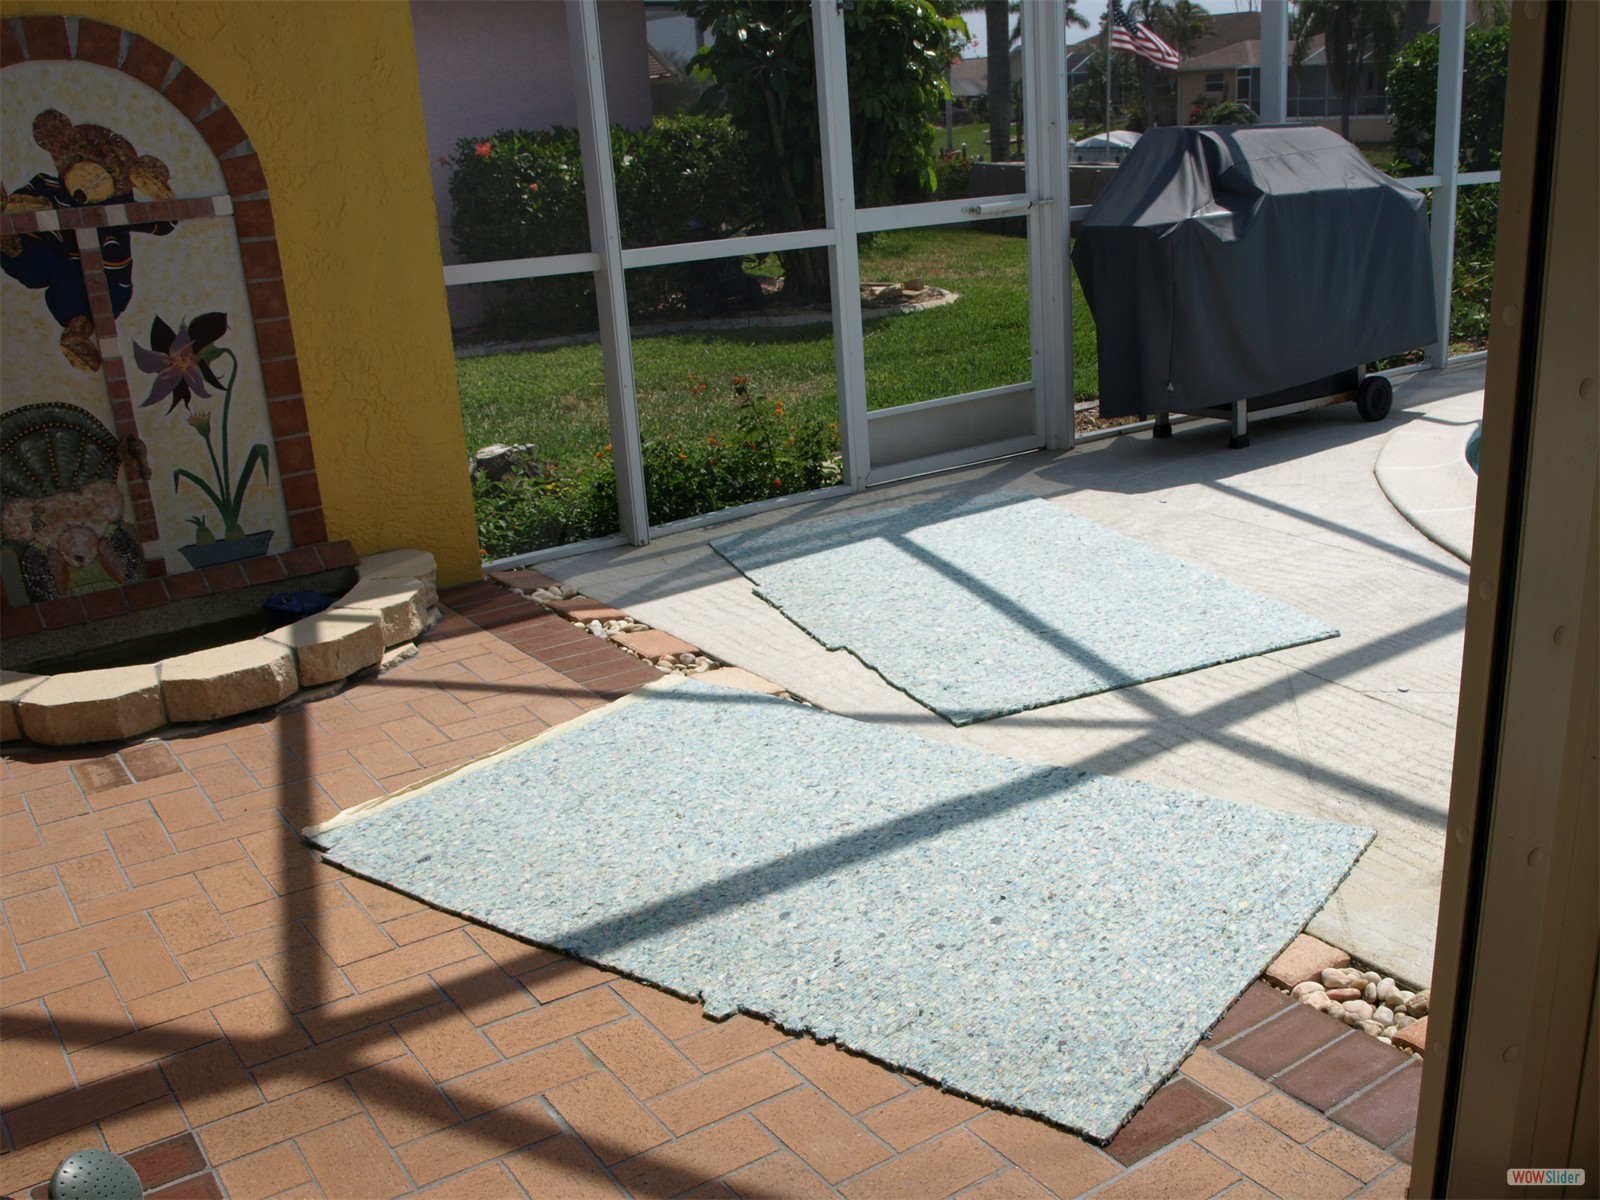 These are the foam layers normally under the carpet drying in the sun.